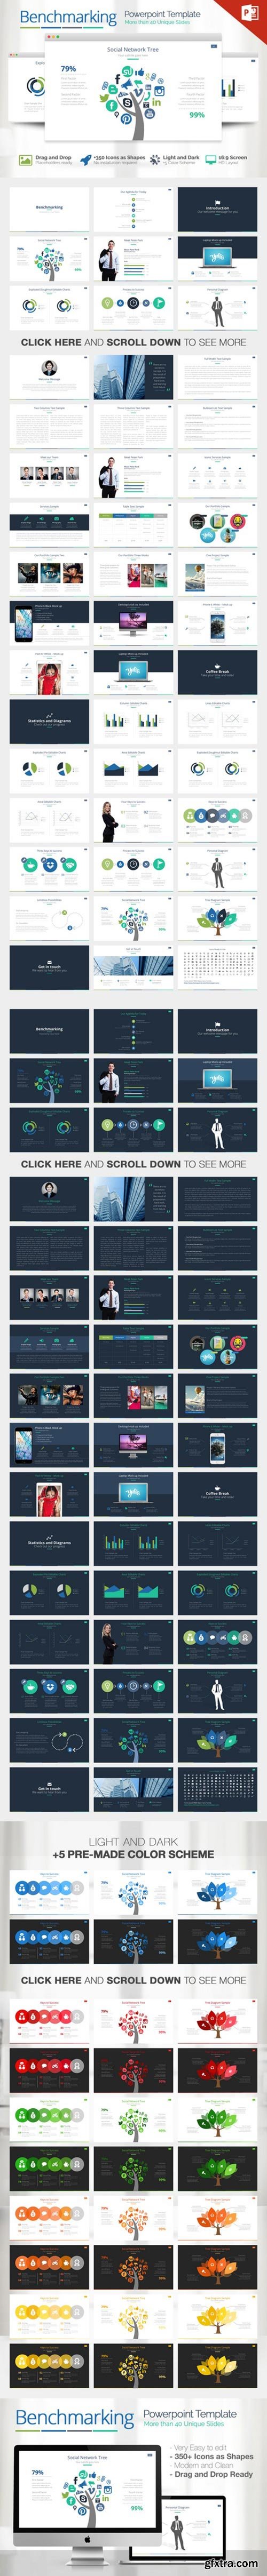 CM - Benchmarking PowerPoint Template 514853